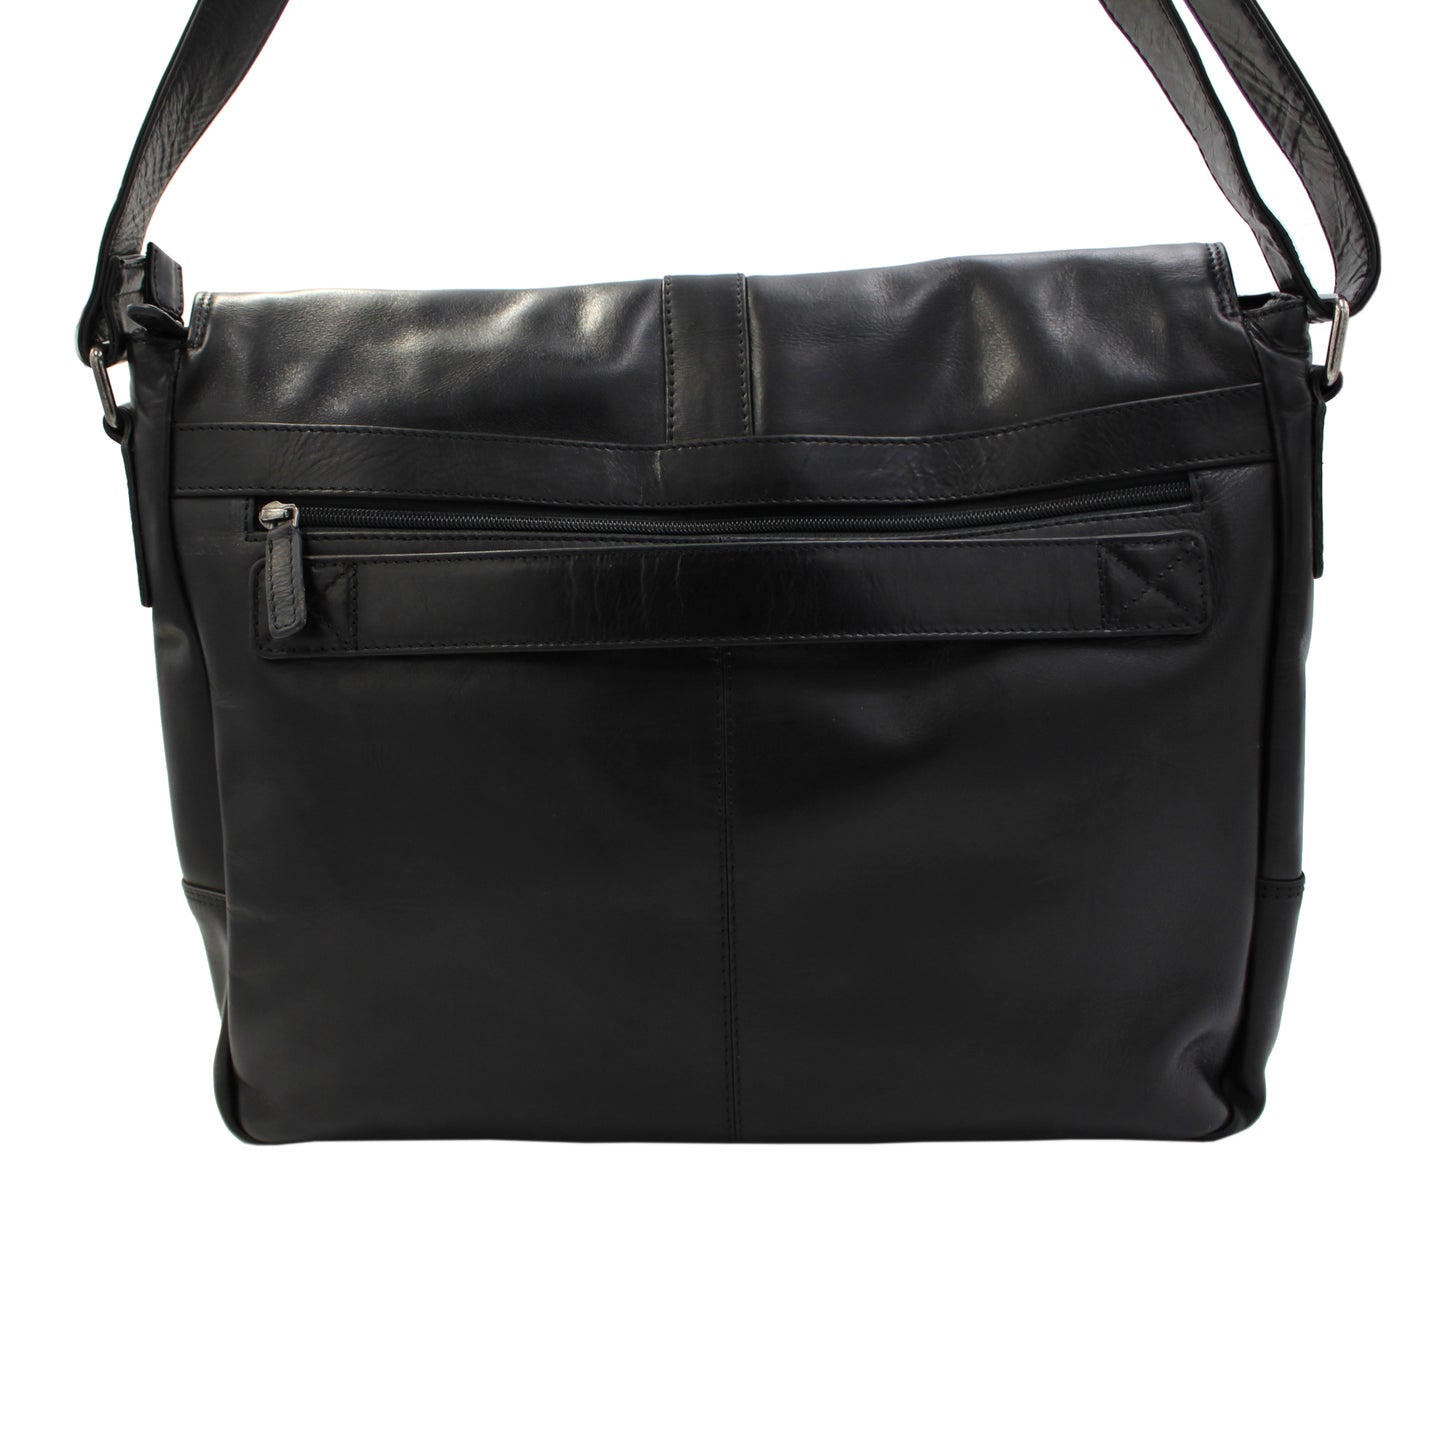 RE Leather Bag (16"x 12"x 2.5")